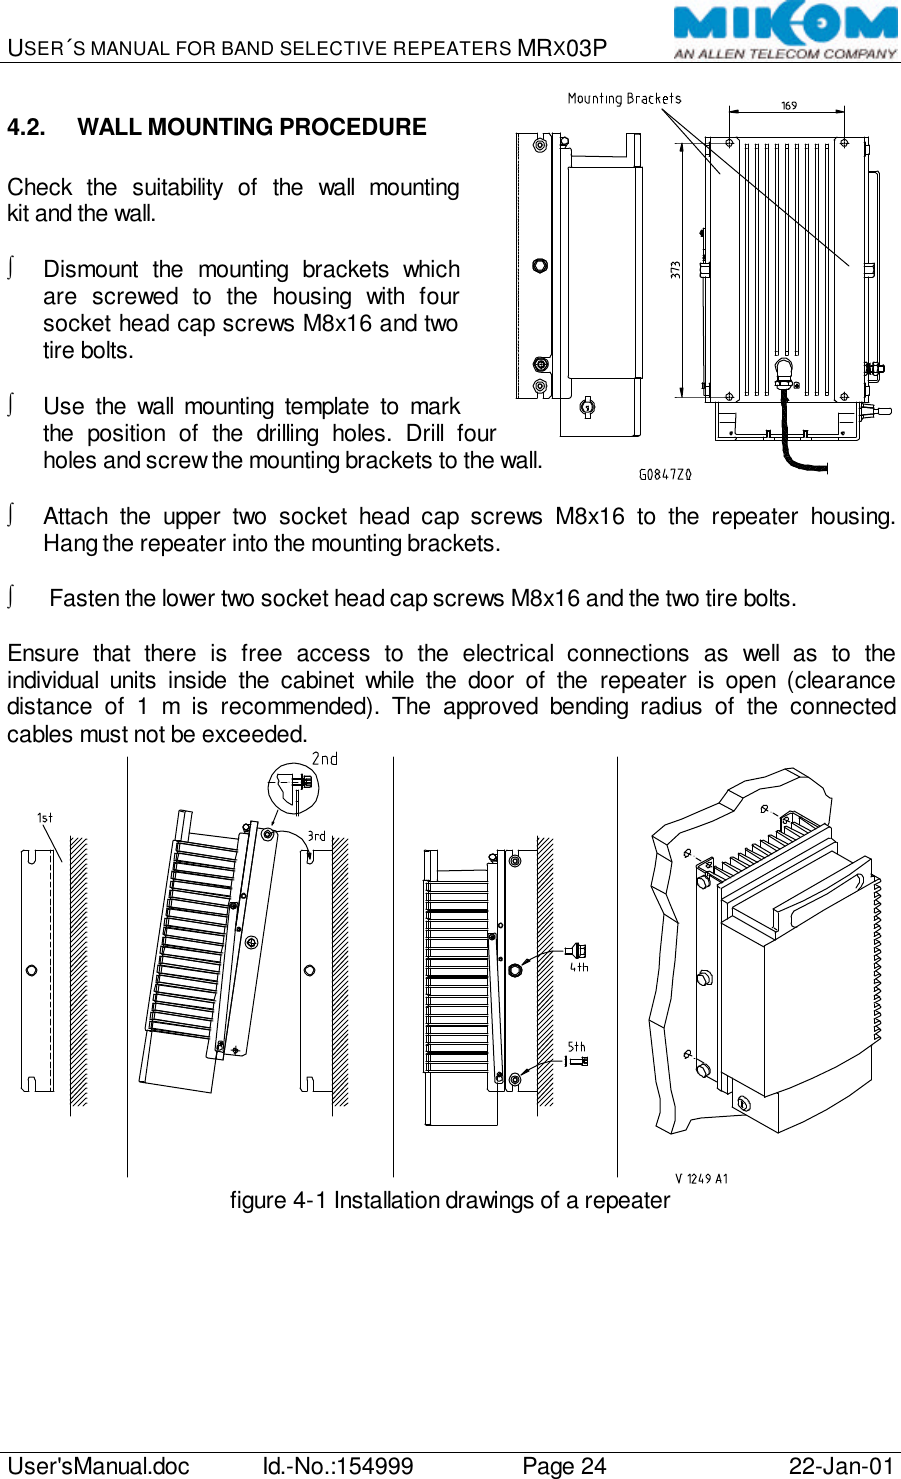 USER´S MANUAL FOR BAND SELECTIVE REPEATERS MRX03P   User&apos;sManual.doc Id.-No.:154999 Page 24 22-Jan-01  4.2. WALL MOUNTING PROCEDURE  Check the suitability of the wall mounting kit and the wall.  ∫ Dismount the mounting brackets which are screwed to the housing with four socket head cap screws M8x16 and two tire bolts.  ∫ Use the wall mounting template to mark the position of the drilling holes. Drill four holes and screw the mounting brackets to the wall.  ∫ Attach the upper two socket head cap screws M8x16 to the repeater housing. Hang the repeater into the mounting brackets.  ∫ Fasten the lower two socket head cap screws M8x16 and the two tire bolts.  Ensure that there is free access to the electrical connections as well as to the individual units inside the cabinet while the door of the repeater is open (clearance distance of 1 m is recommended). The approved bending radius of the connected cables must not be exceeded.  figure 4-1 Installation drawings of a repeater  